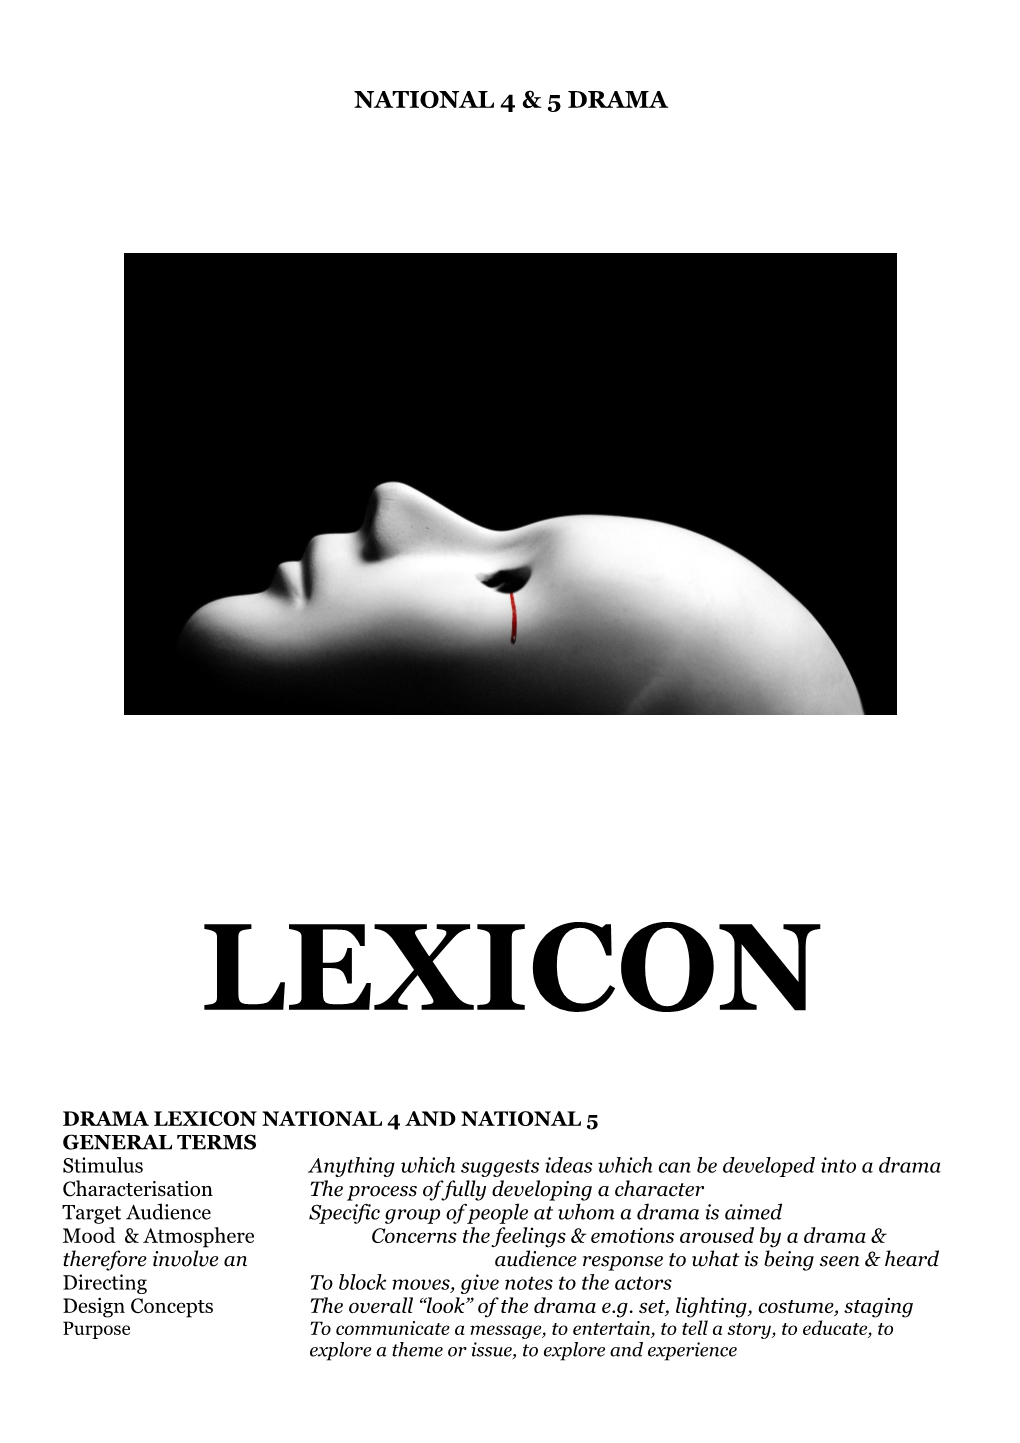 Drama Lexicon National 4 and National 5